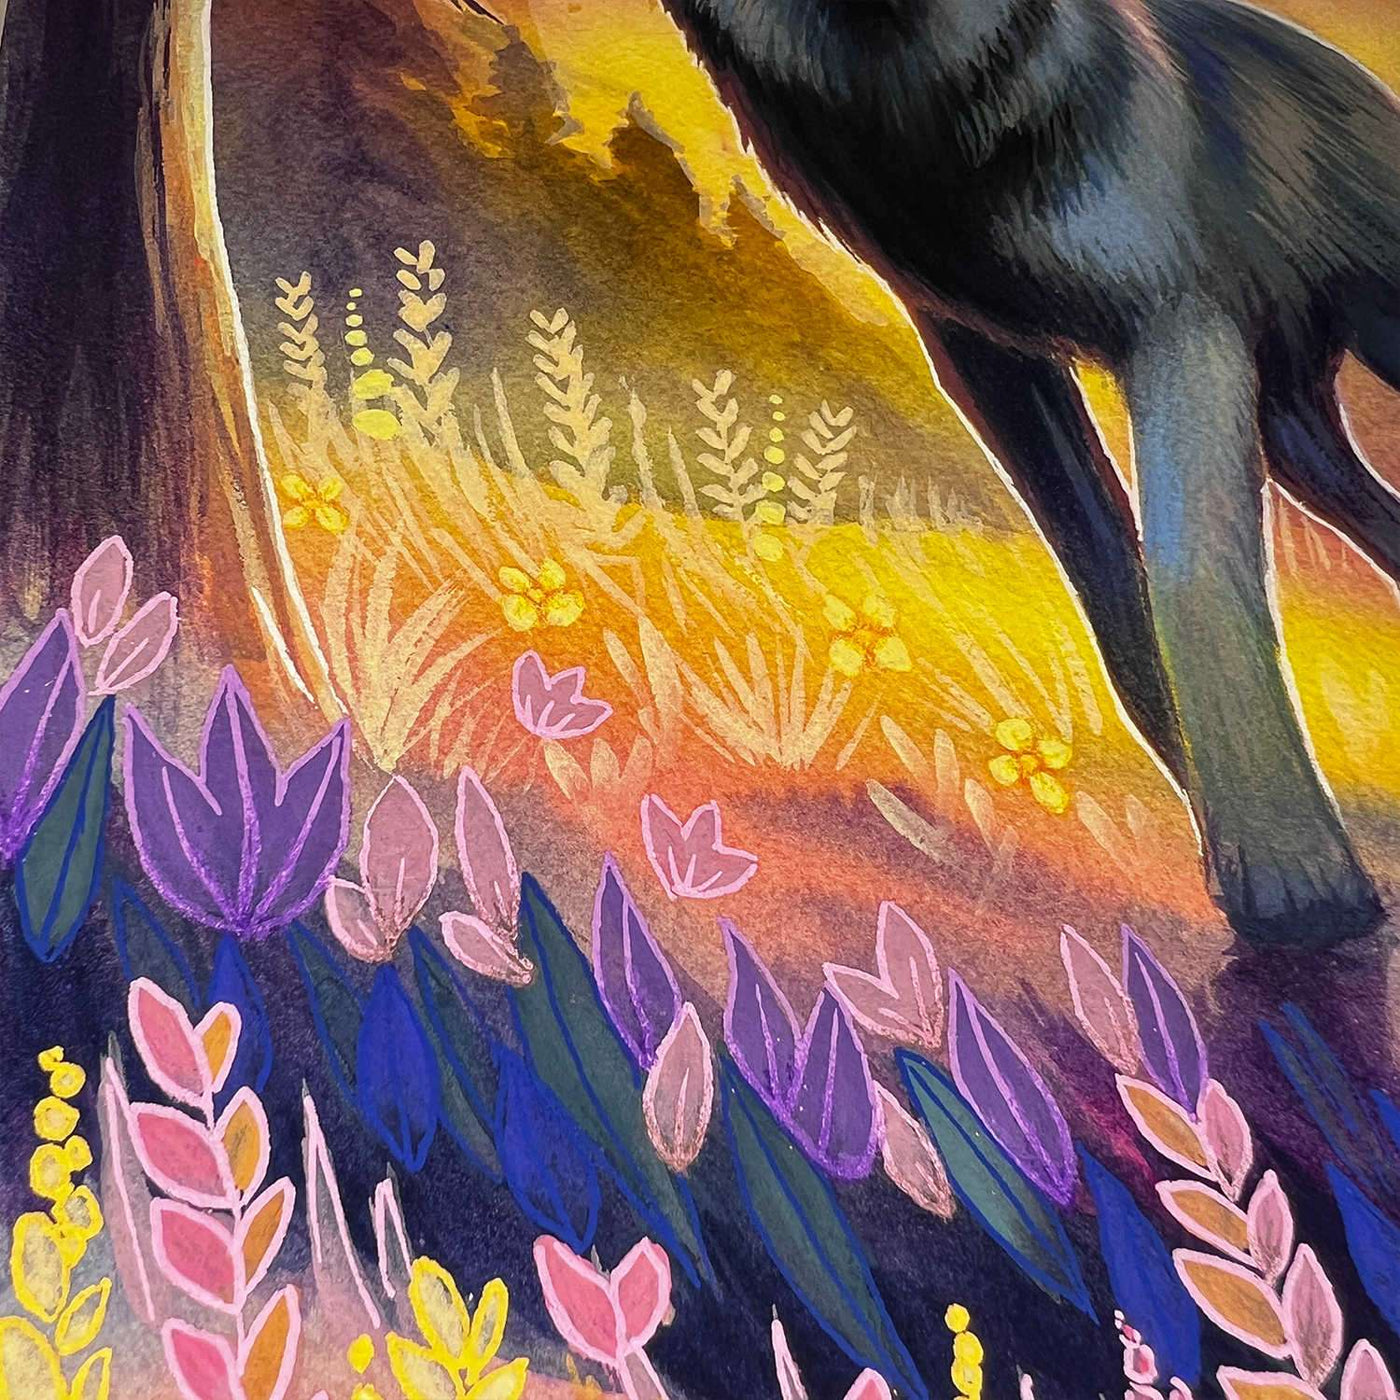 Colorful watercolor painting of The Wolf (Twilight Watch) - Original Artwork walking through a vibrant, flower-filled meadow with a dark tree trunk on the left.